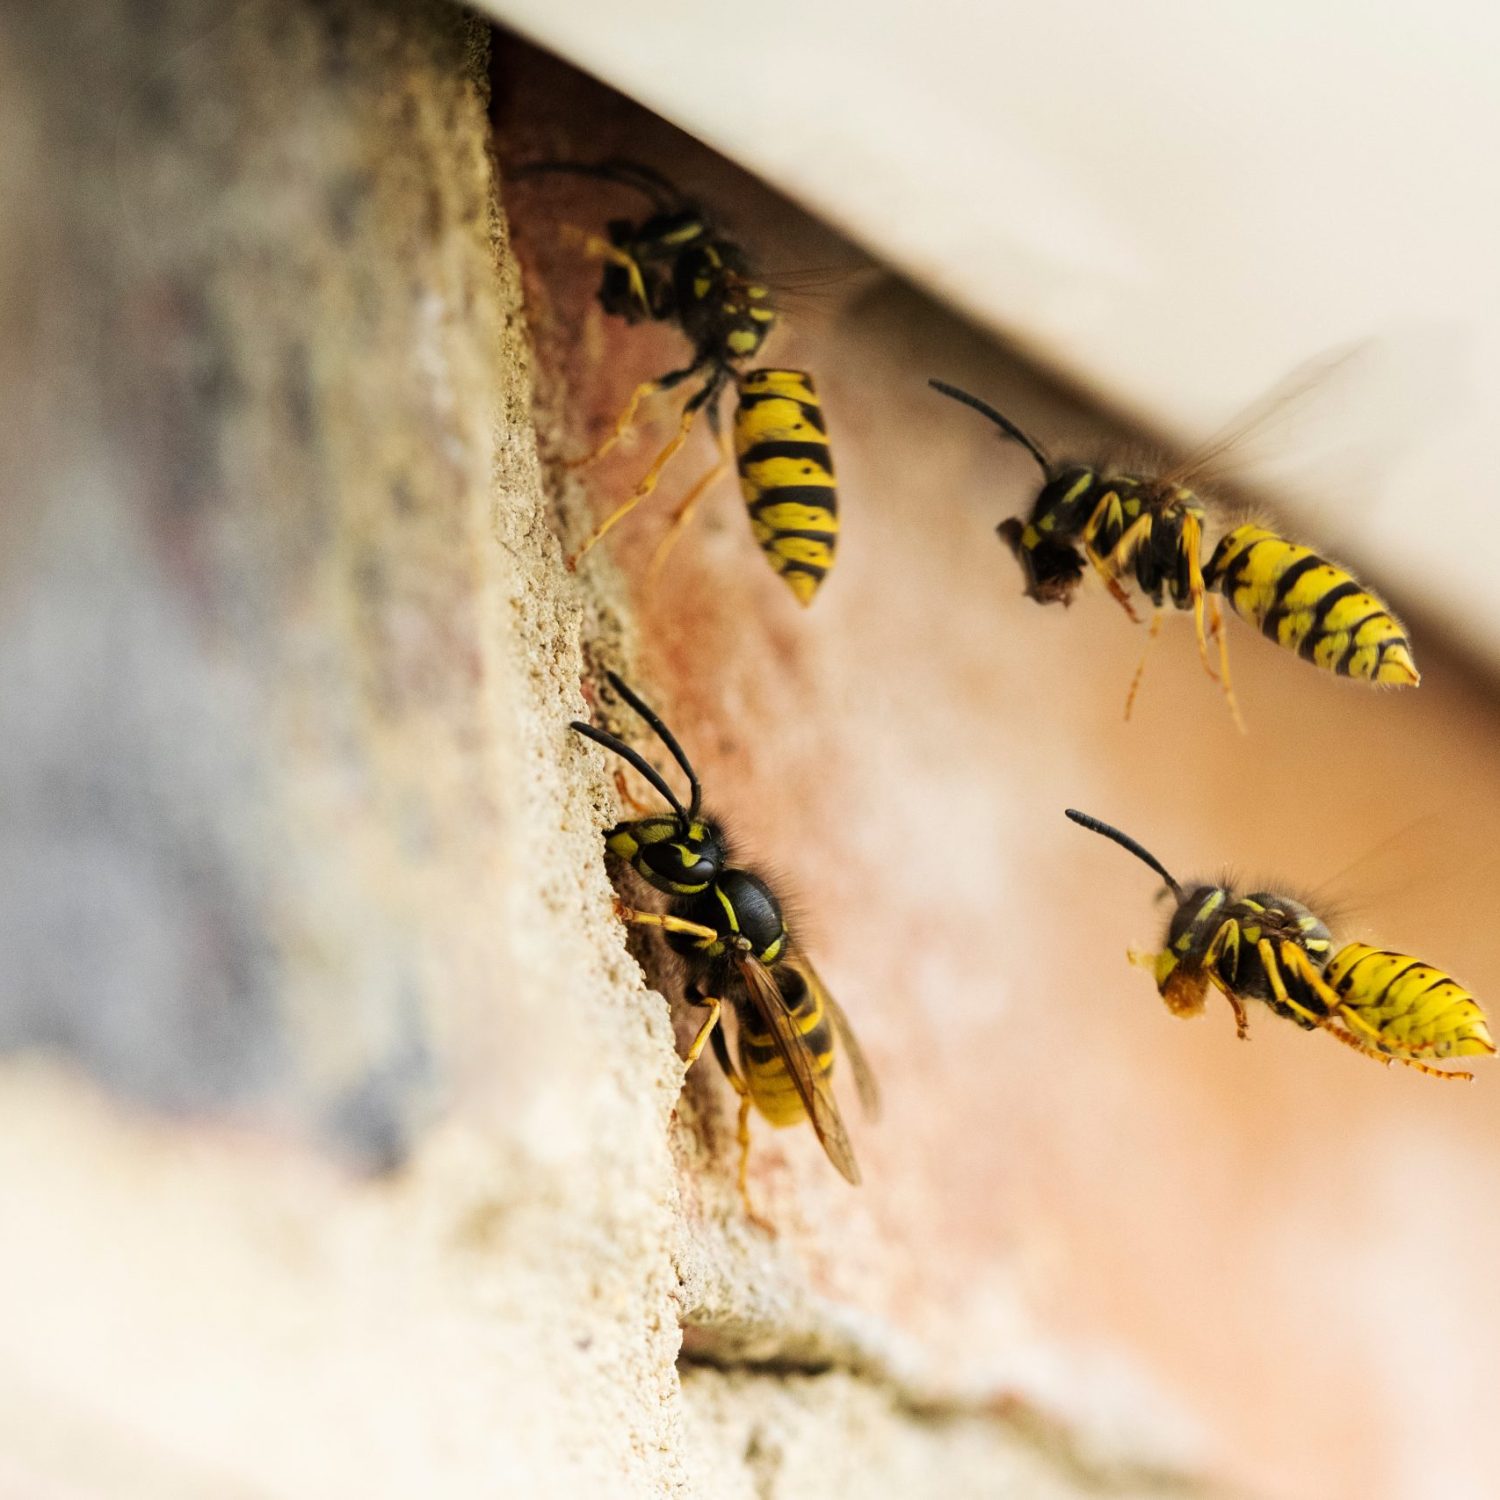 Wasps Causing Problem By Building Nest Under Roof Of House